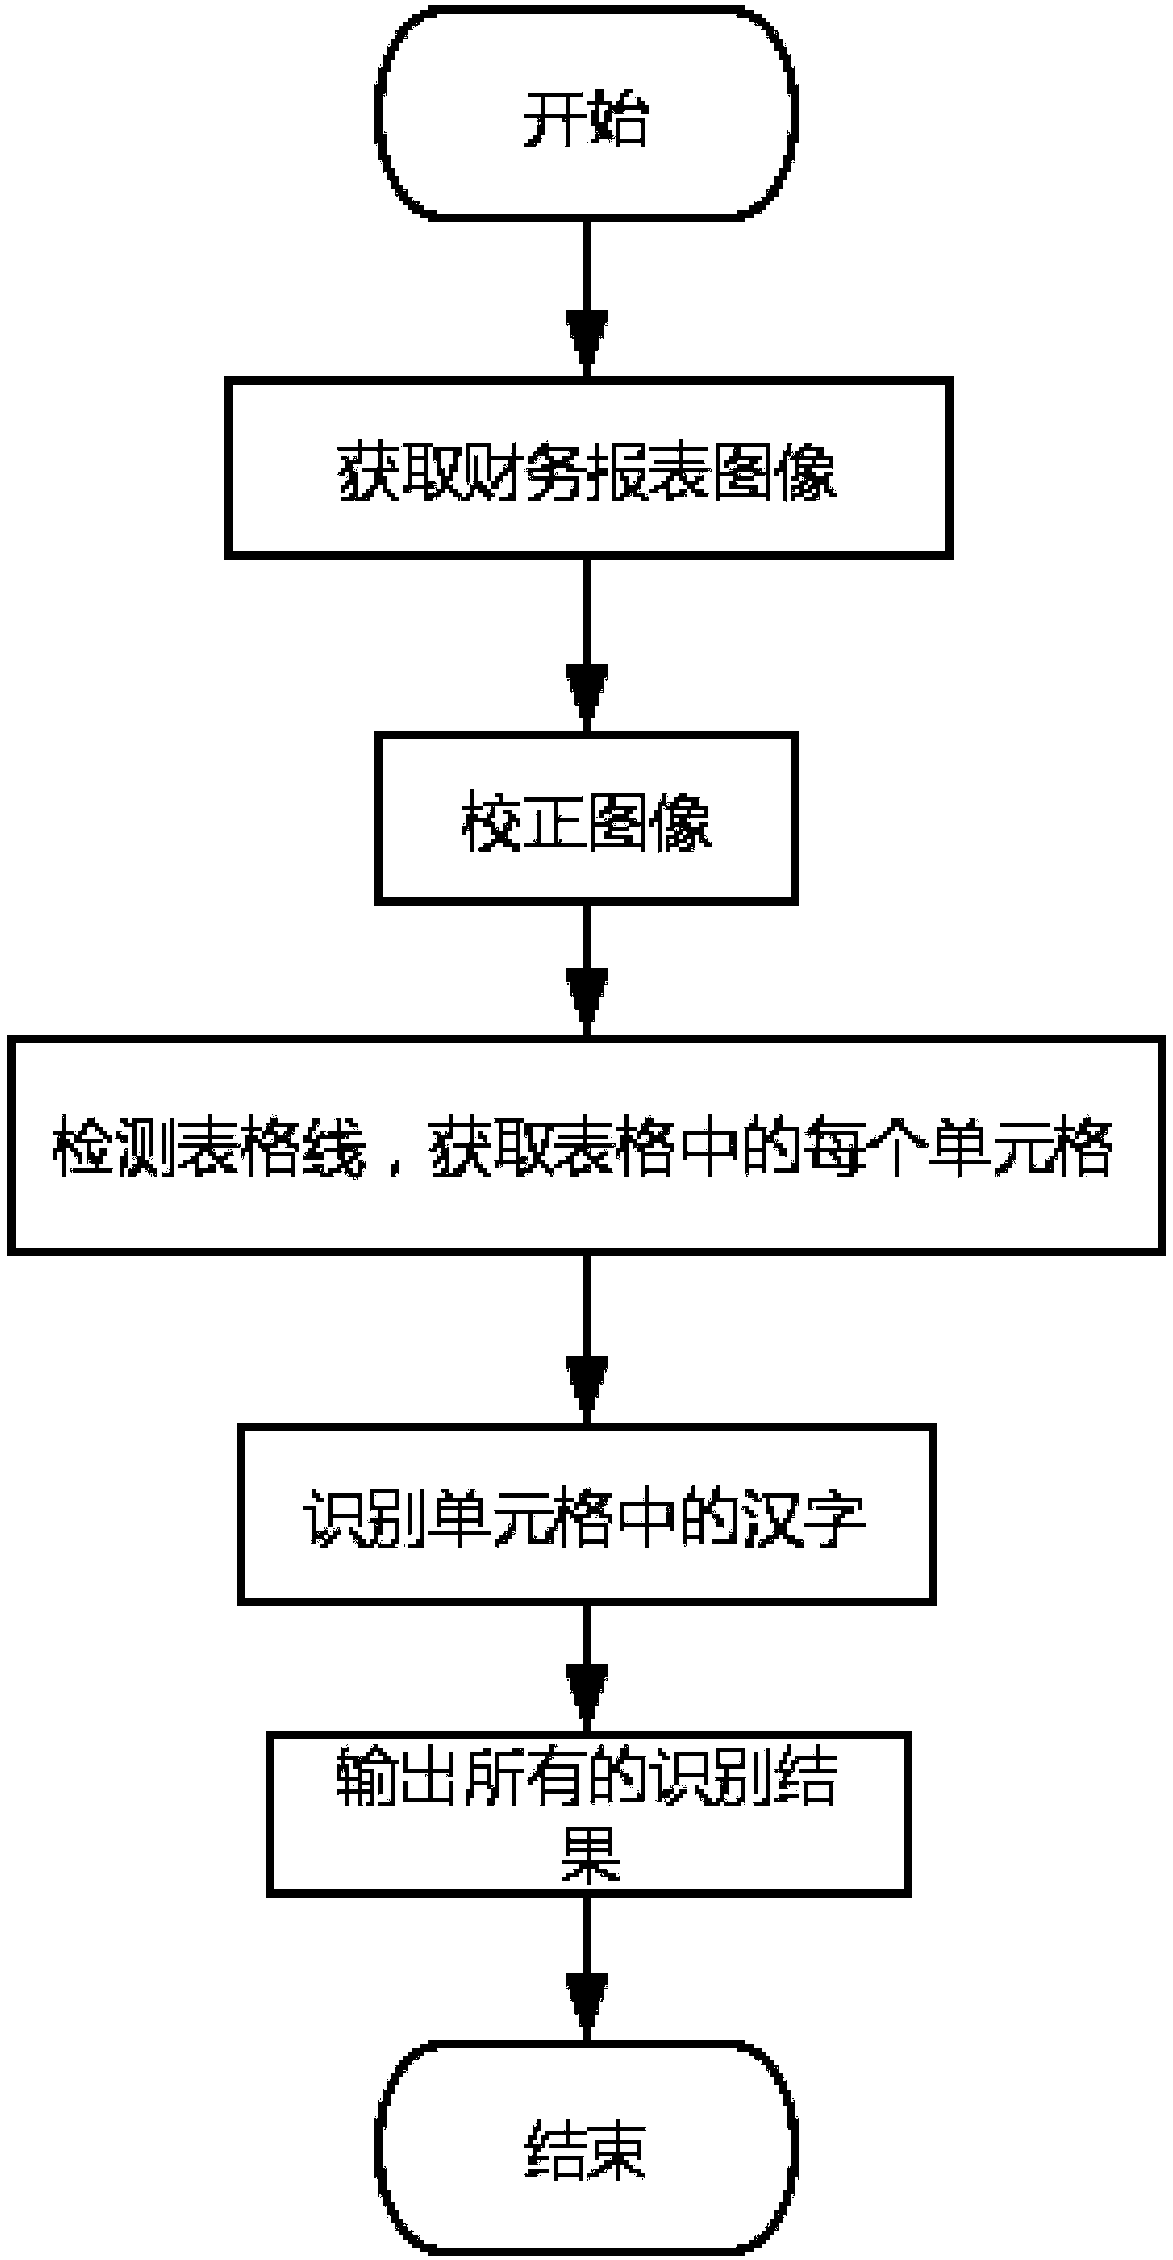 Chinese character recognition method and device for financial statements